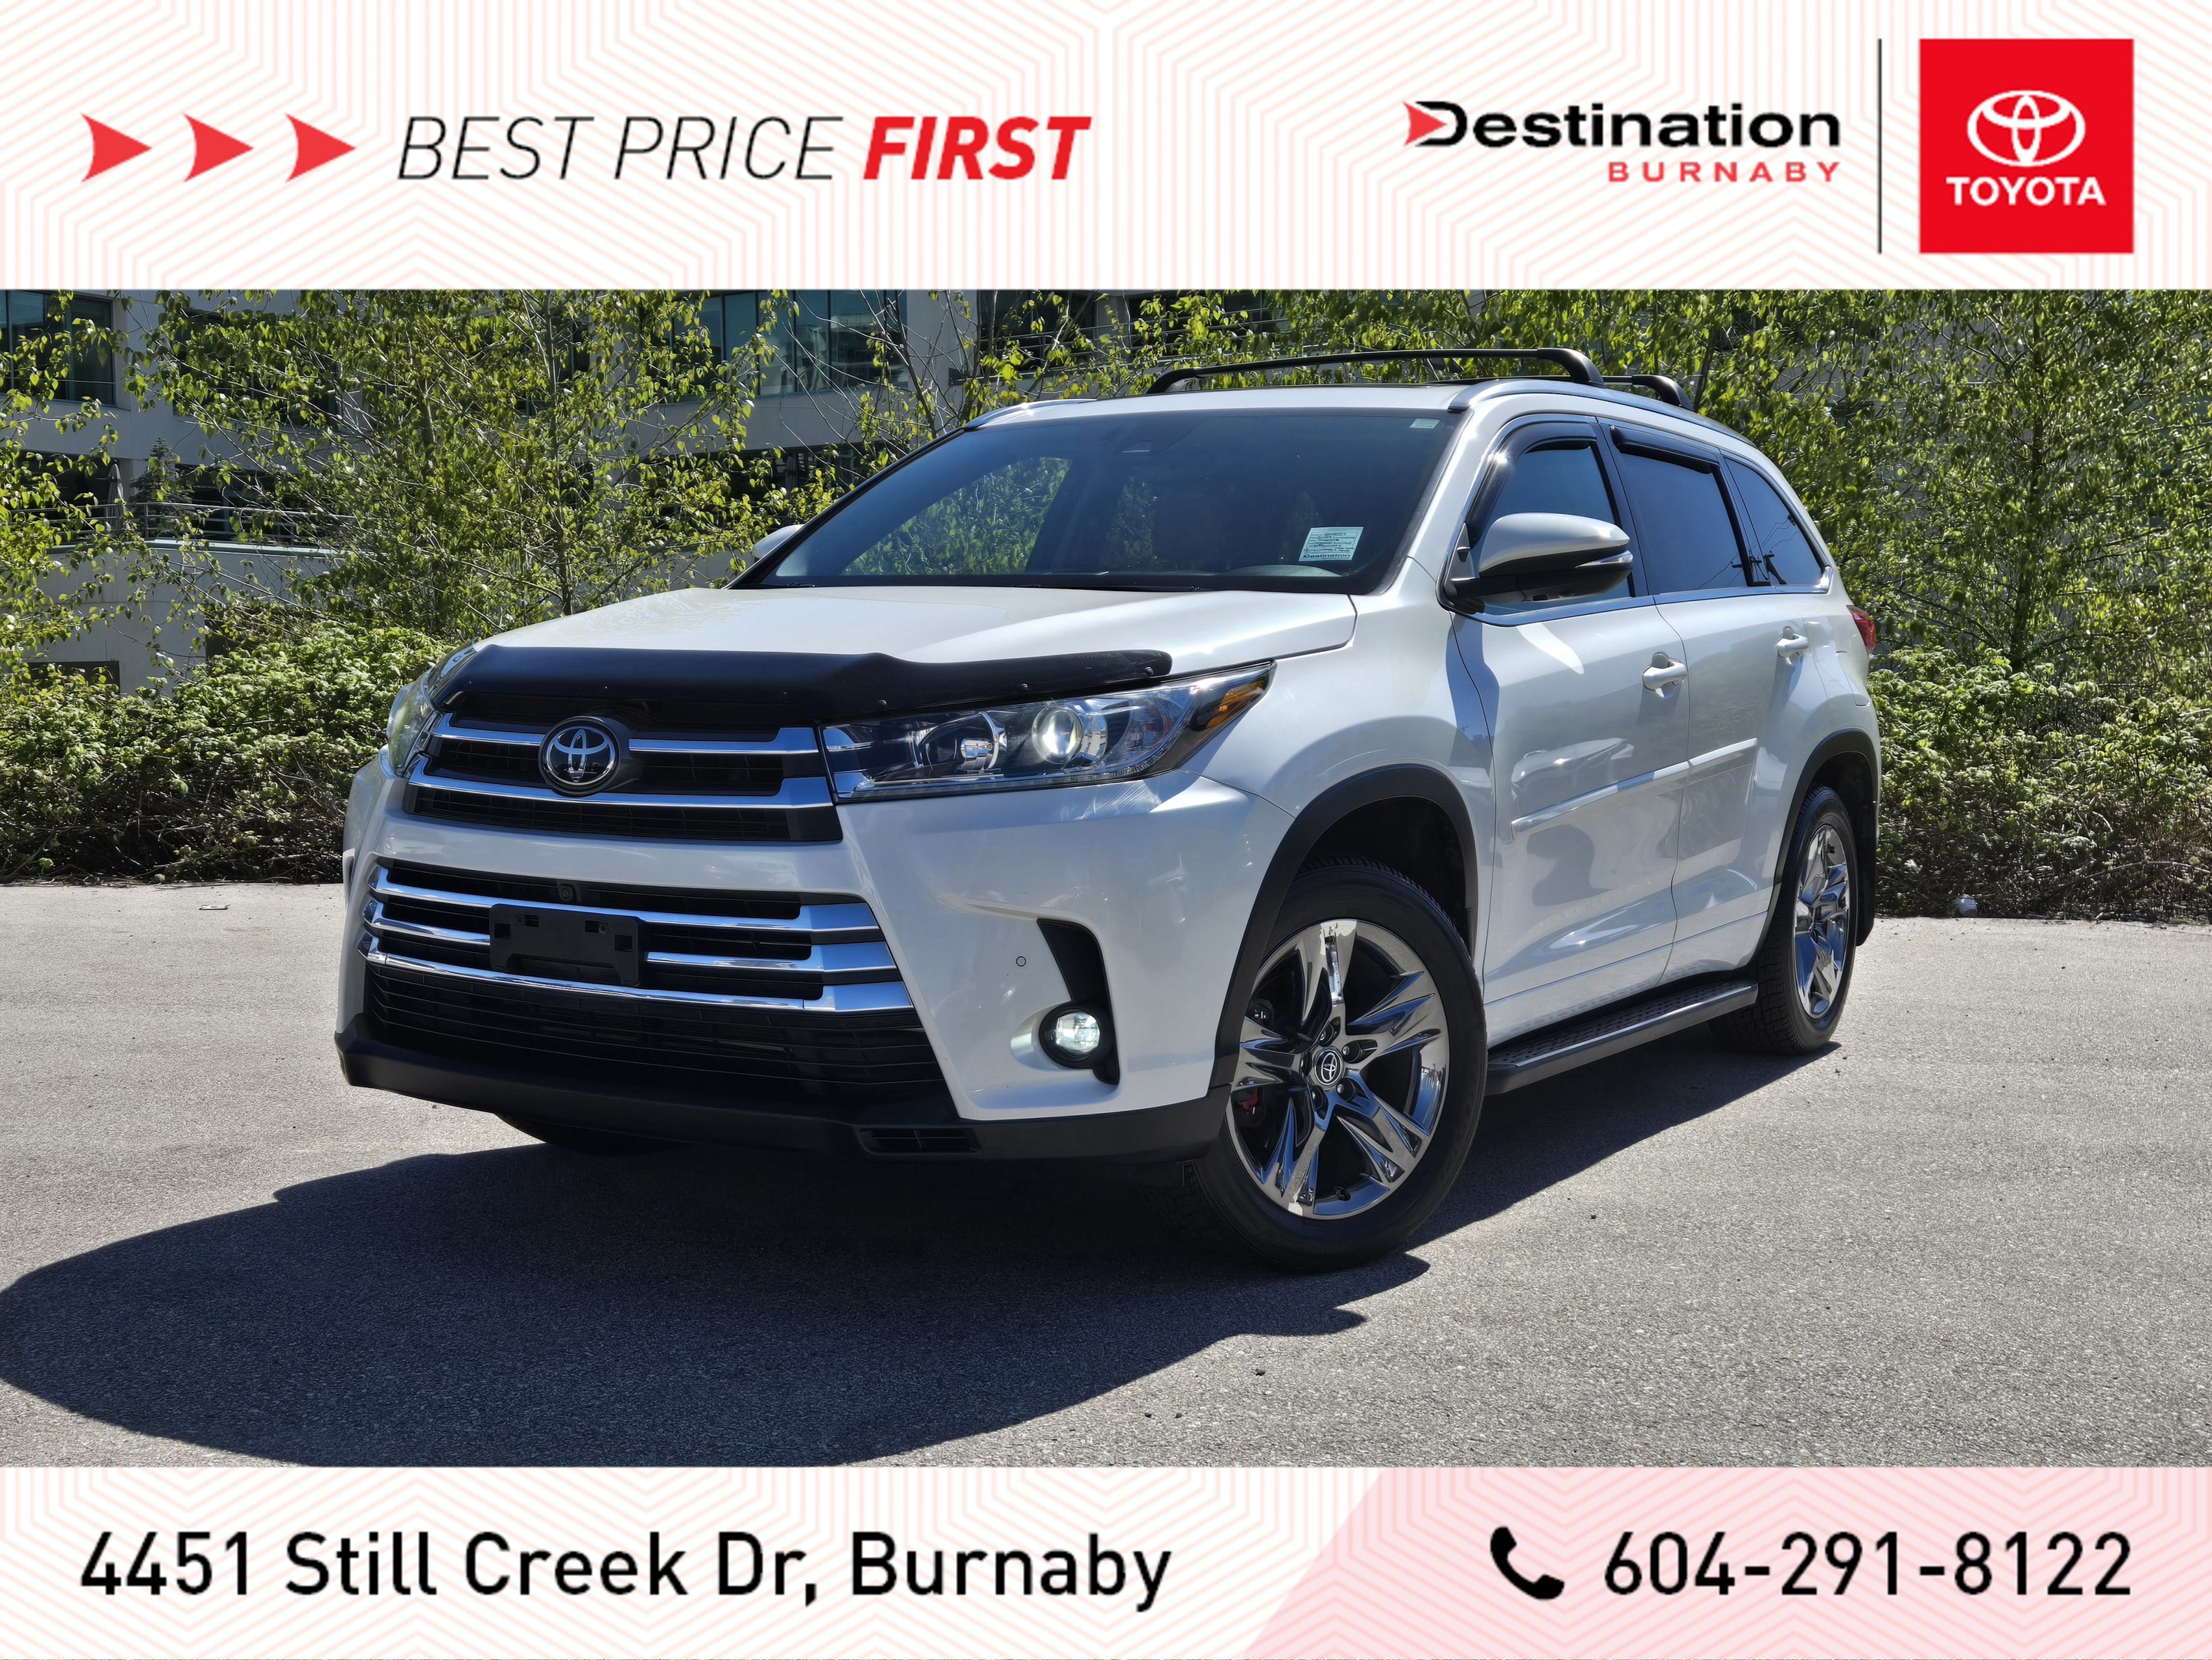 2019 Toyota Highlander Limited AWD - Local, One Owner, Top of the Line!